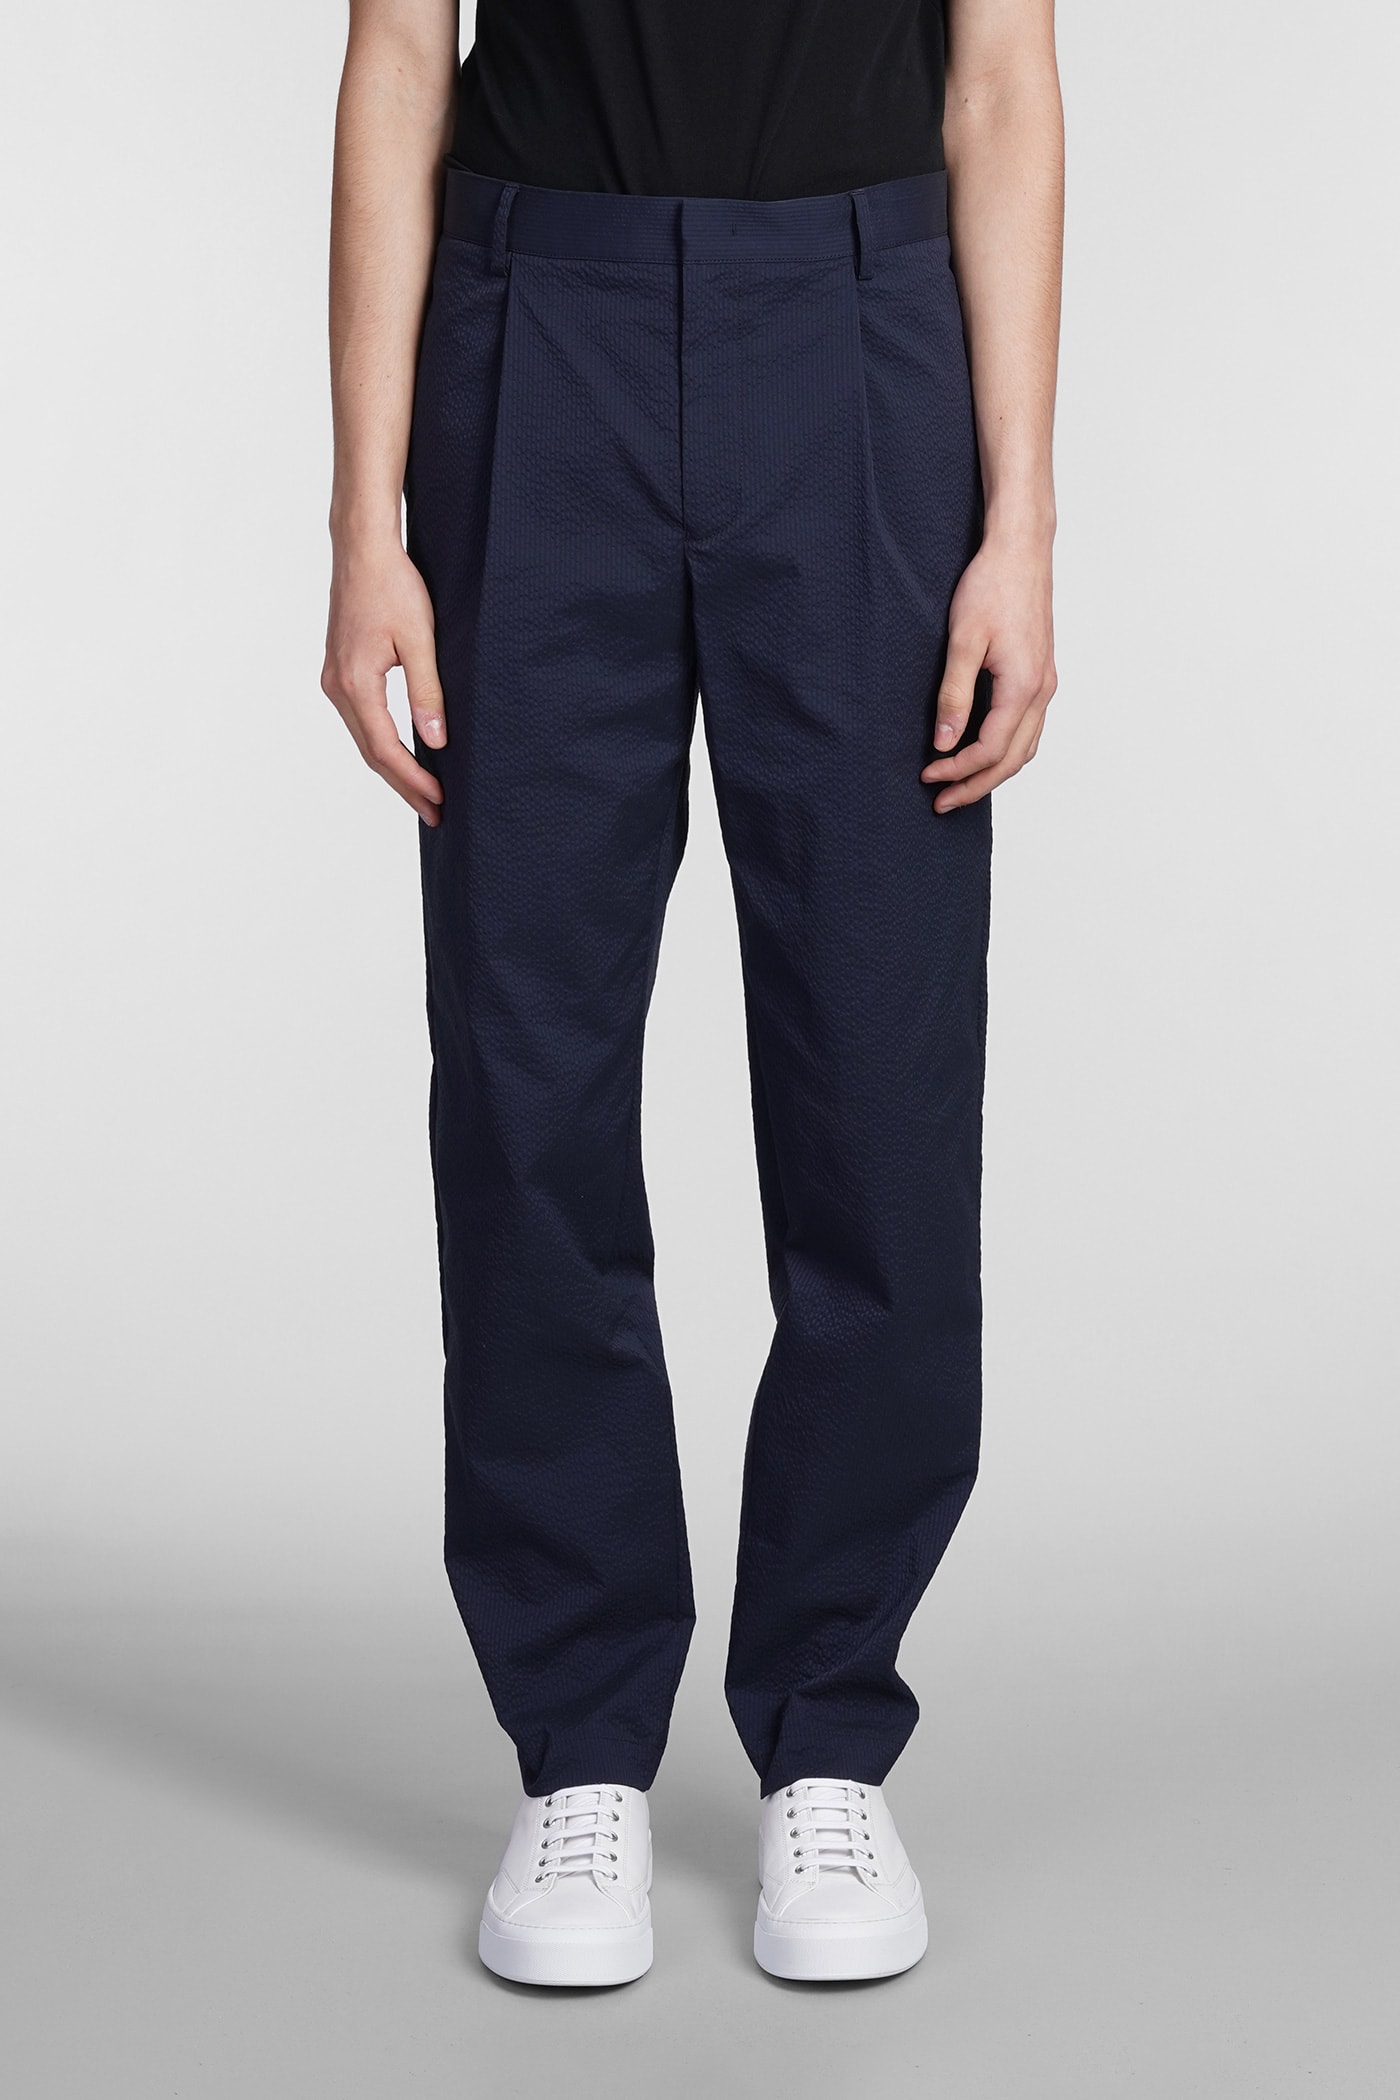 EMPORIO ARMANI PANTS IN BLUE POLYESTER